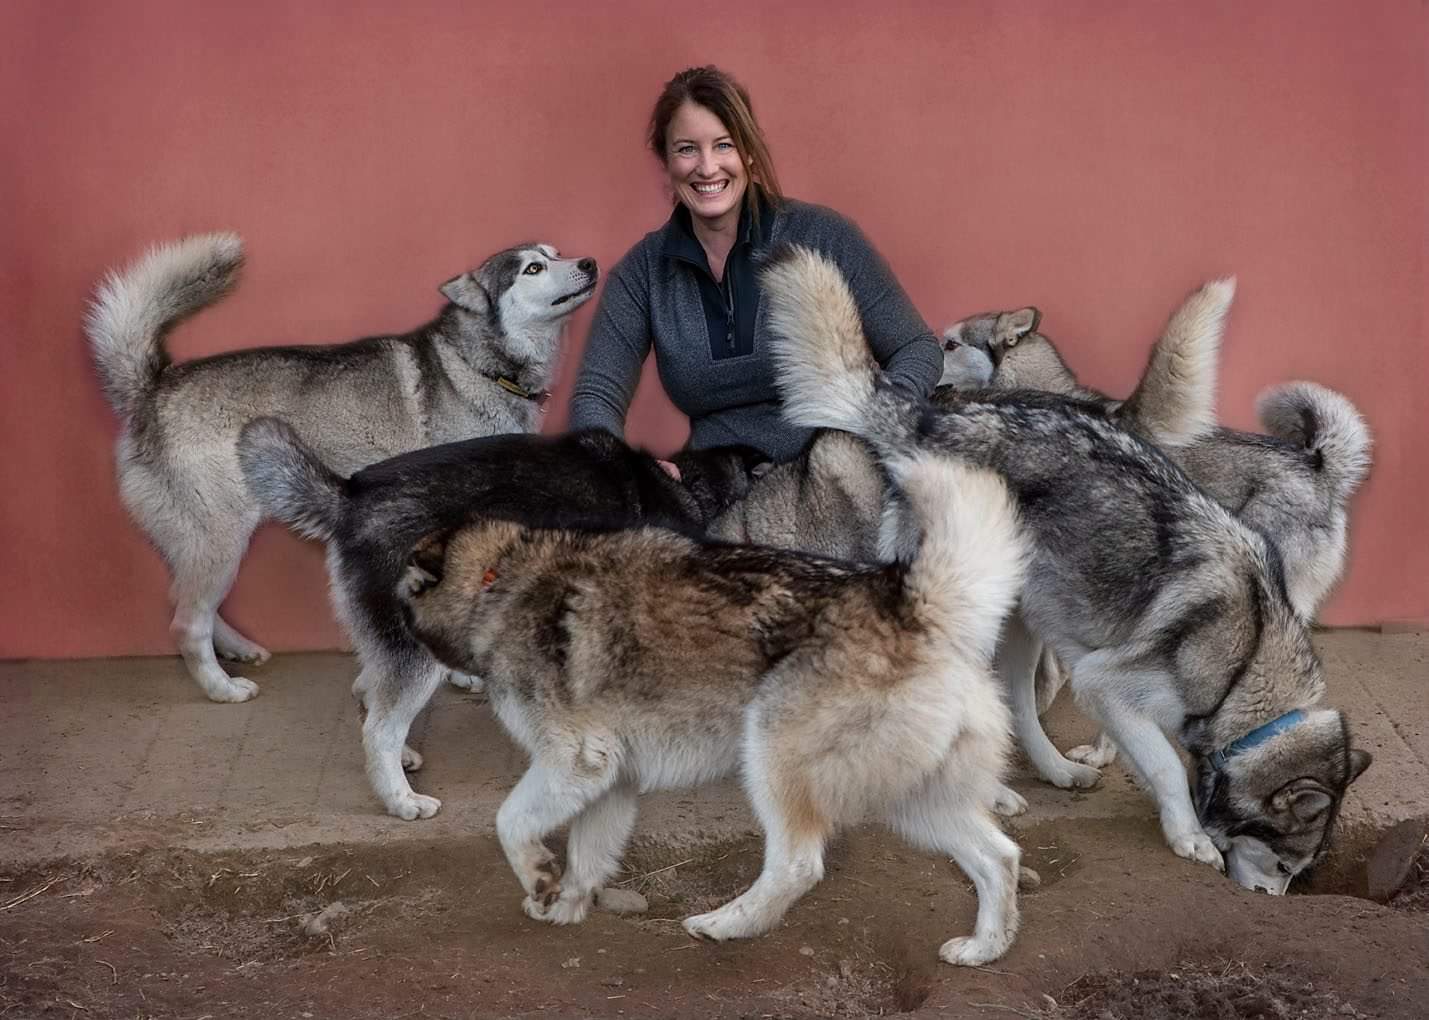 Husky Rescue NZ founder Michelle Attwood says the charity has been hit hard financially. Photo:...